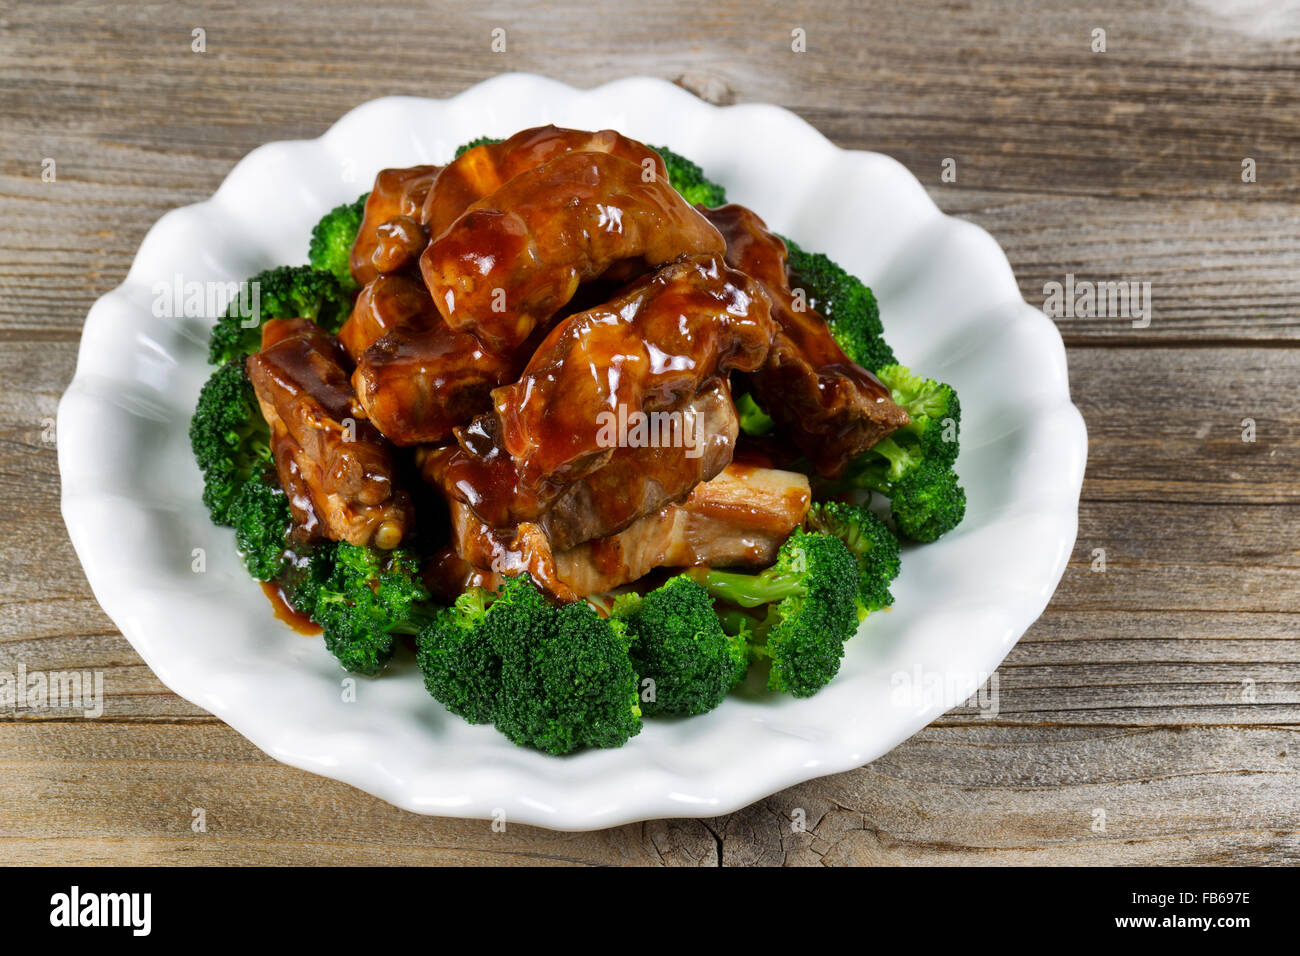 Close up view of barbecued beef ribs, in extra sauce, and broccoli in white plate on rustic wood setting. Stock Photo